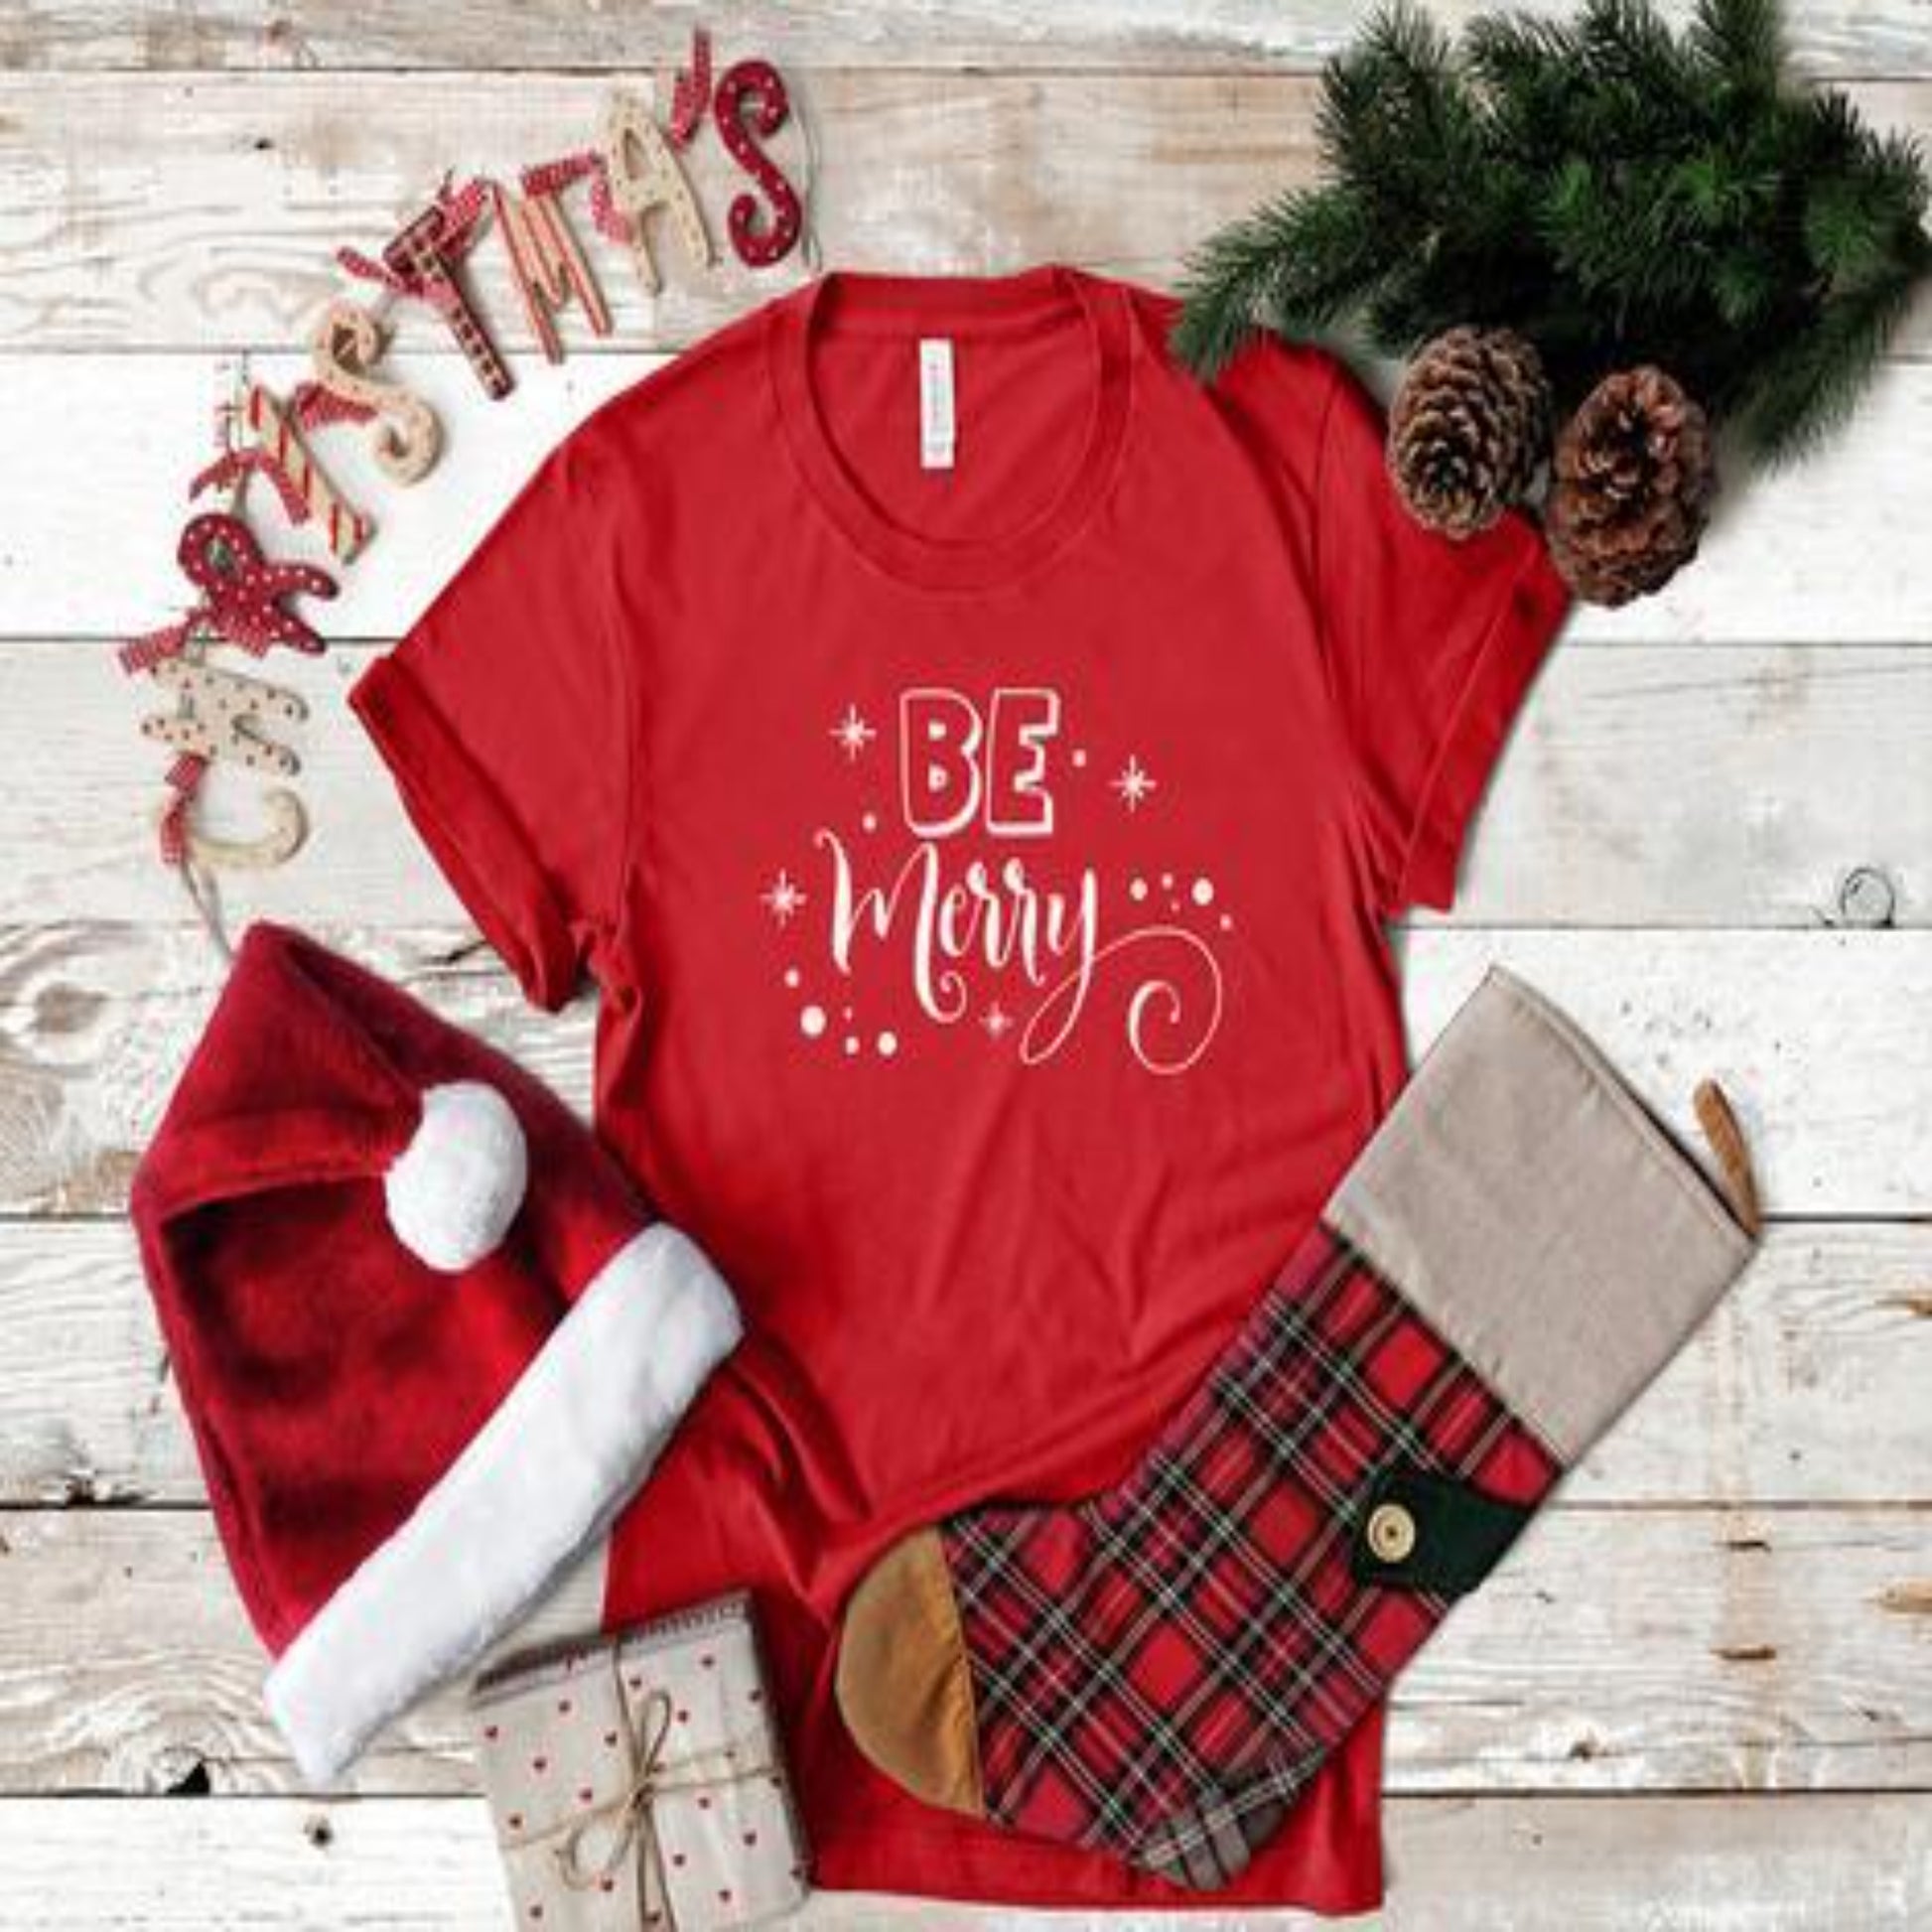 be_merry specialty tee casual shirt Christmas tshirt